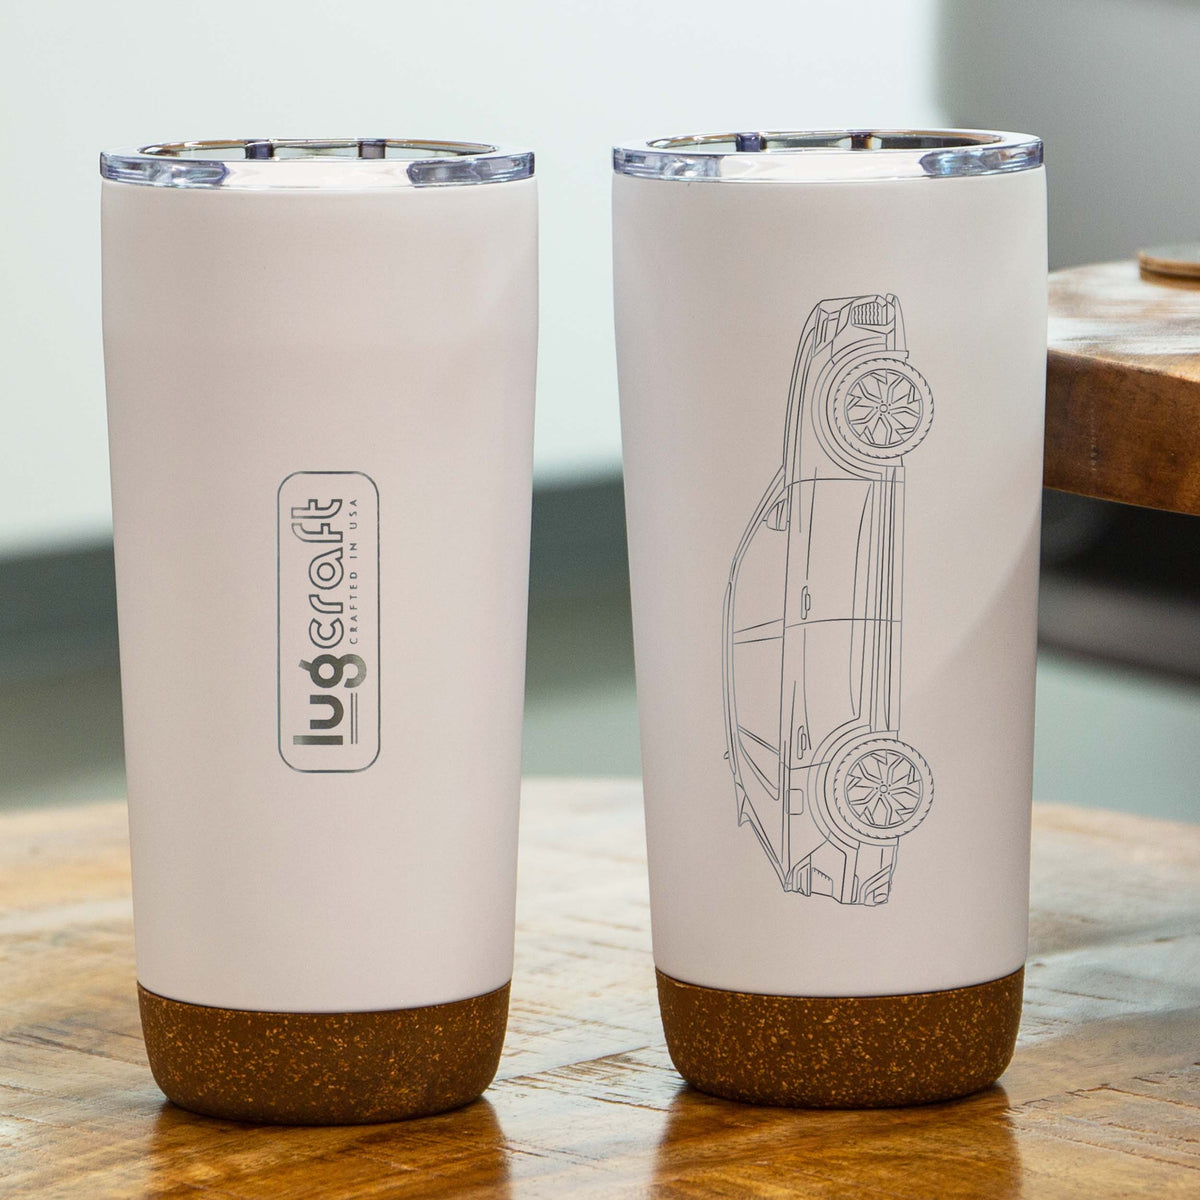 Audi Q8 RS Insulated Stainless Steel Coffee Tumbler - 20 oz